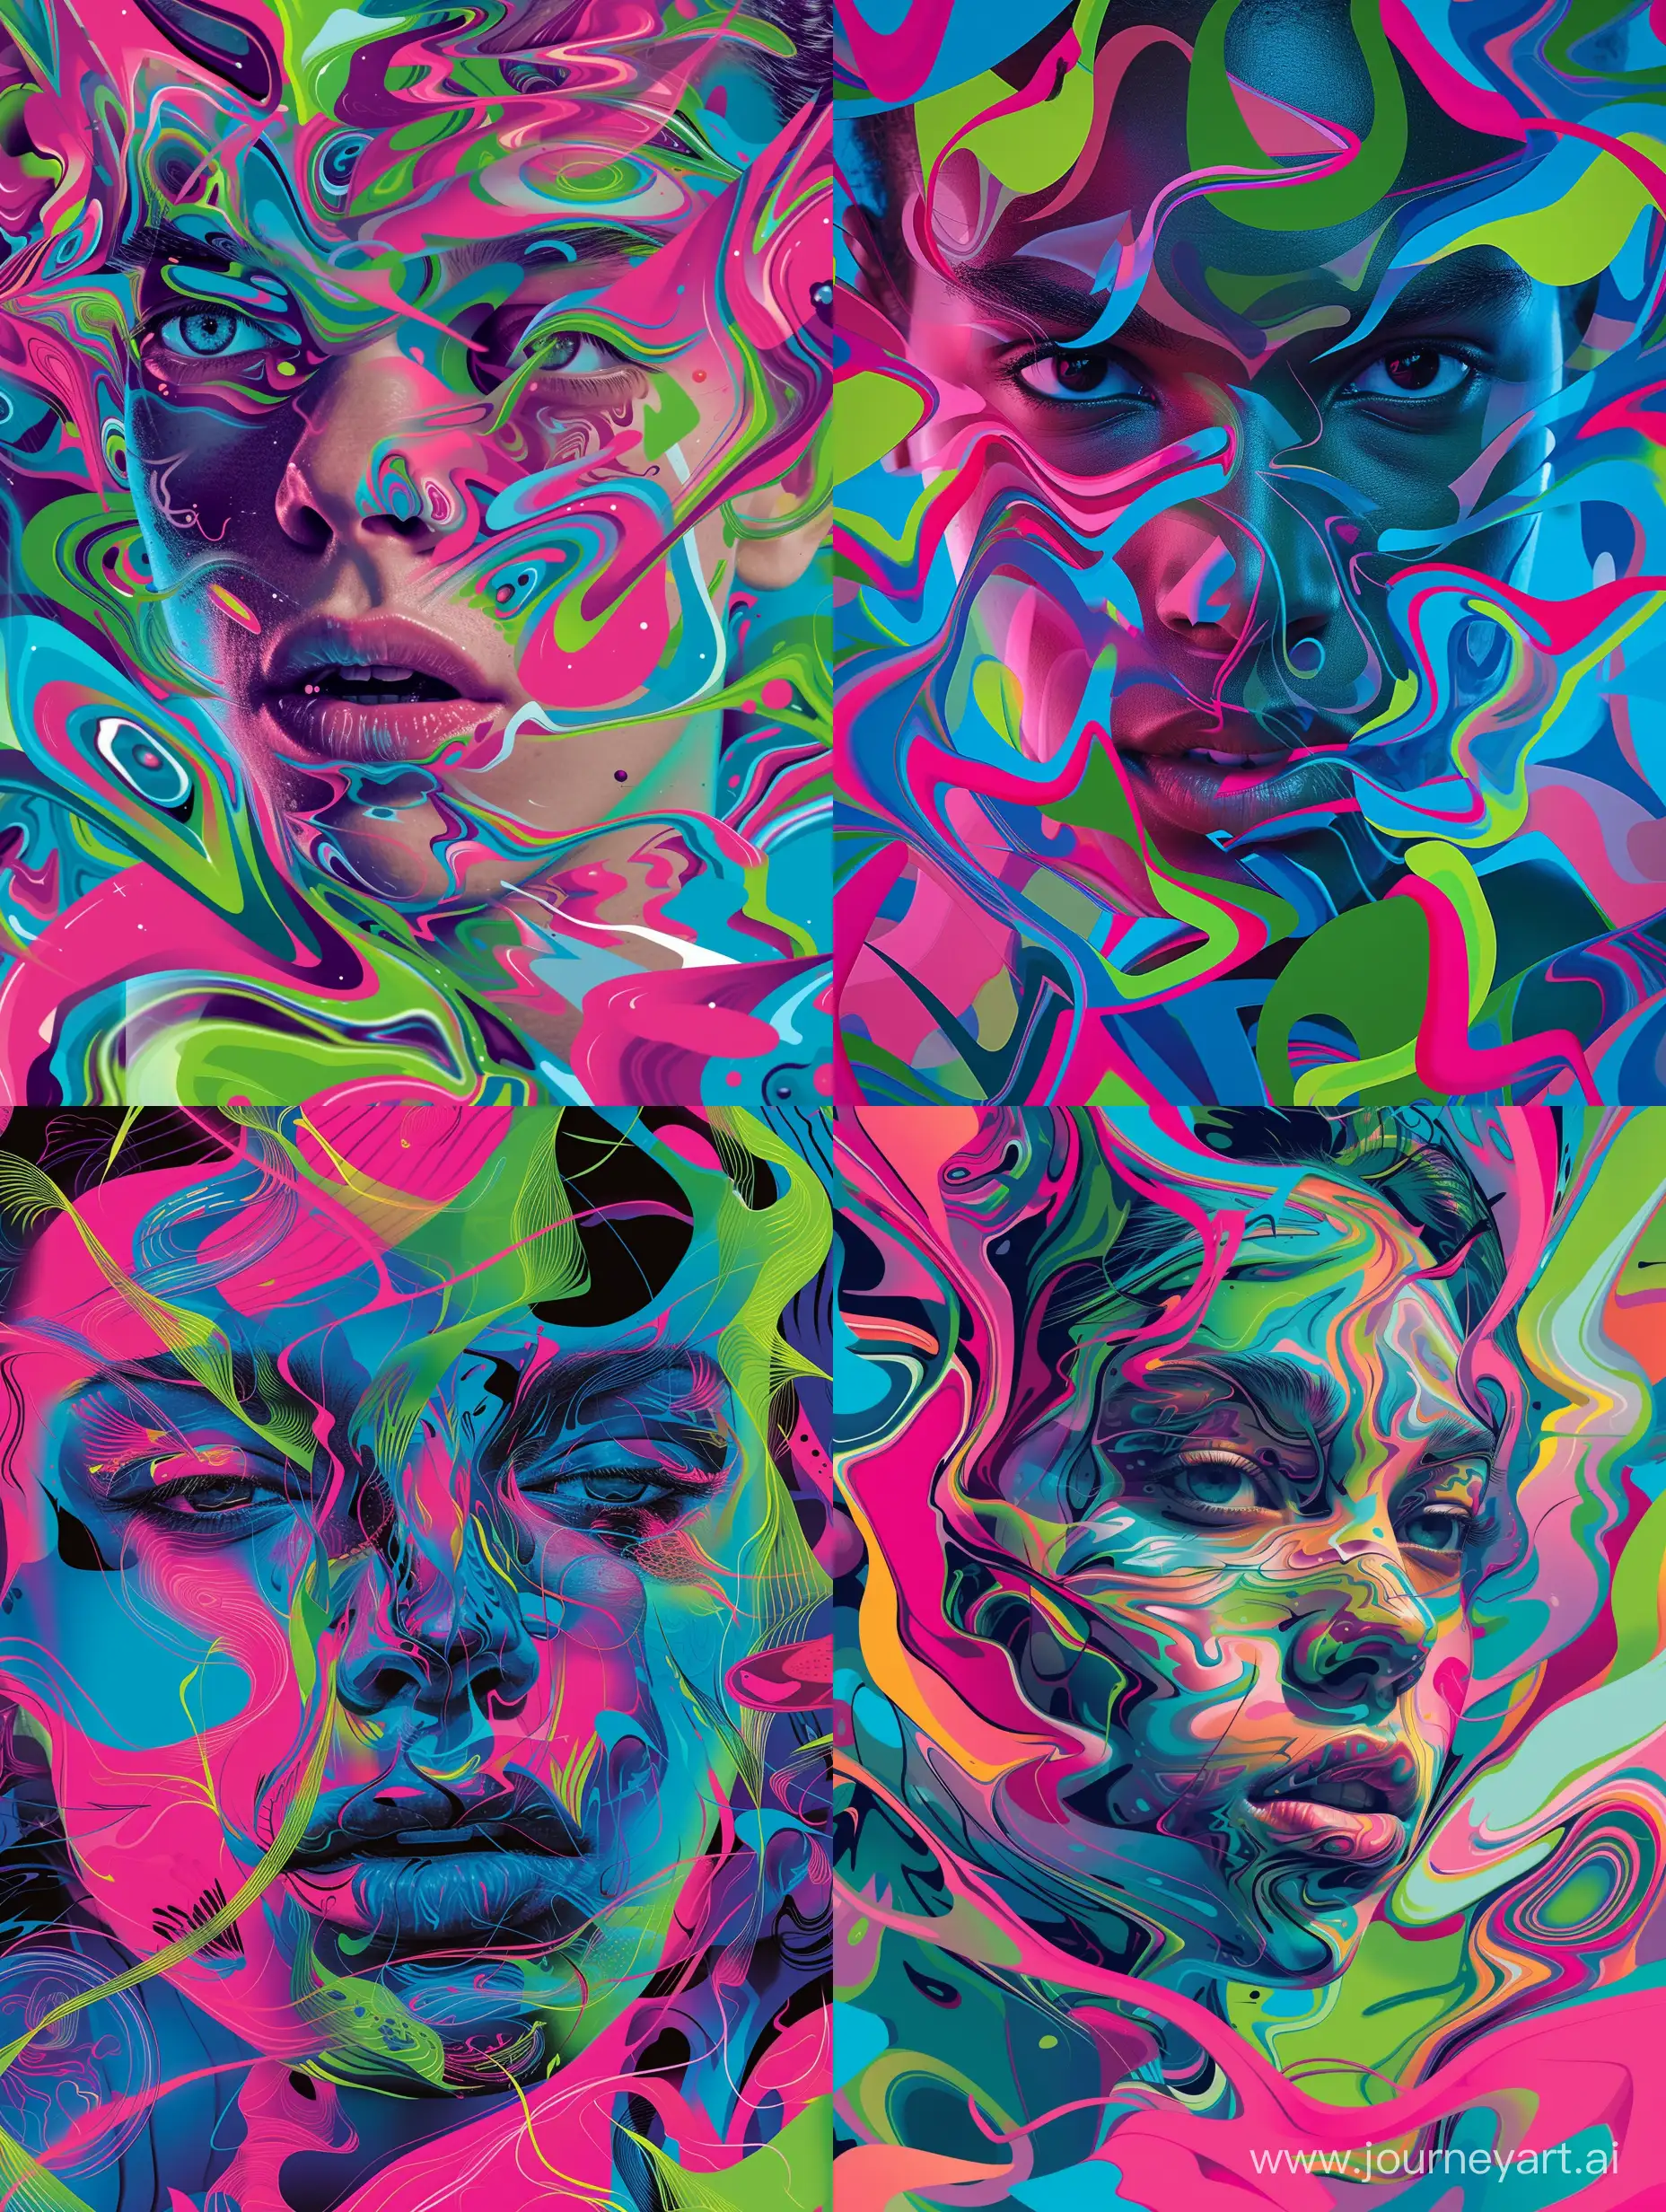 Expressive-Portrait-with-Bold-Abstract-Design-in-Neon-Hues